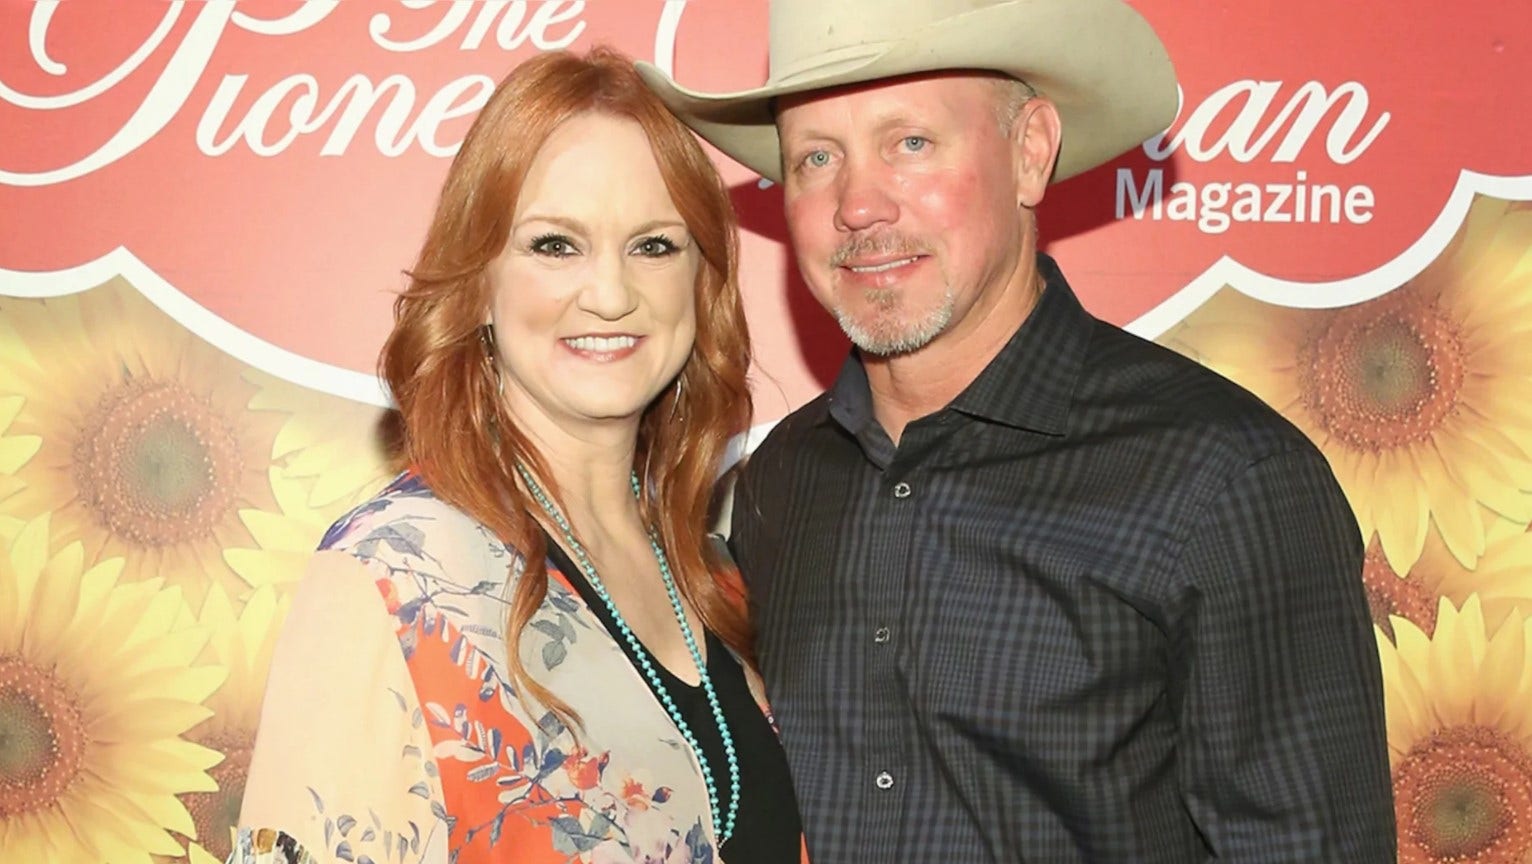 Ree Drummond shares sweet selfies with husband Ladd from Colorado vacation